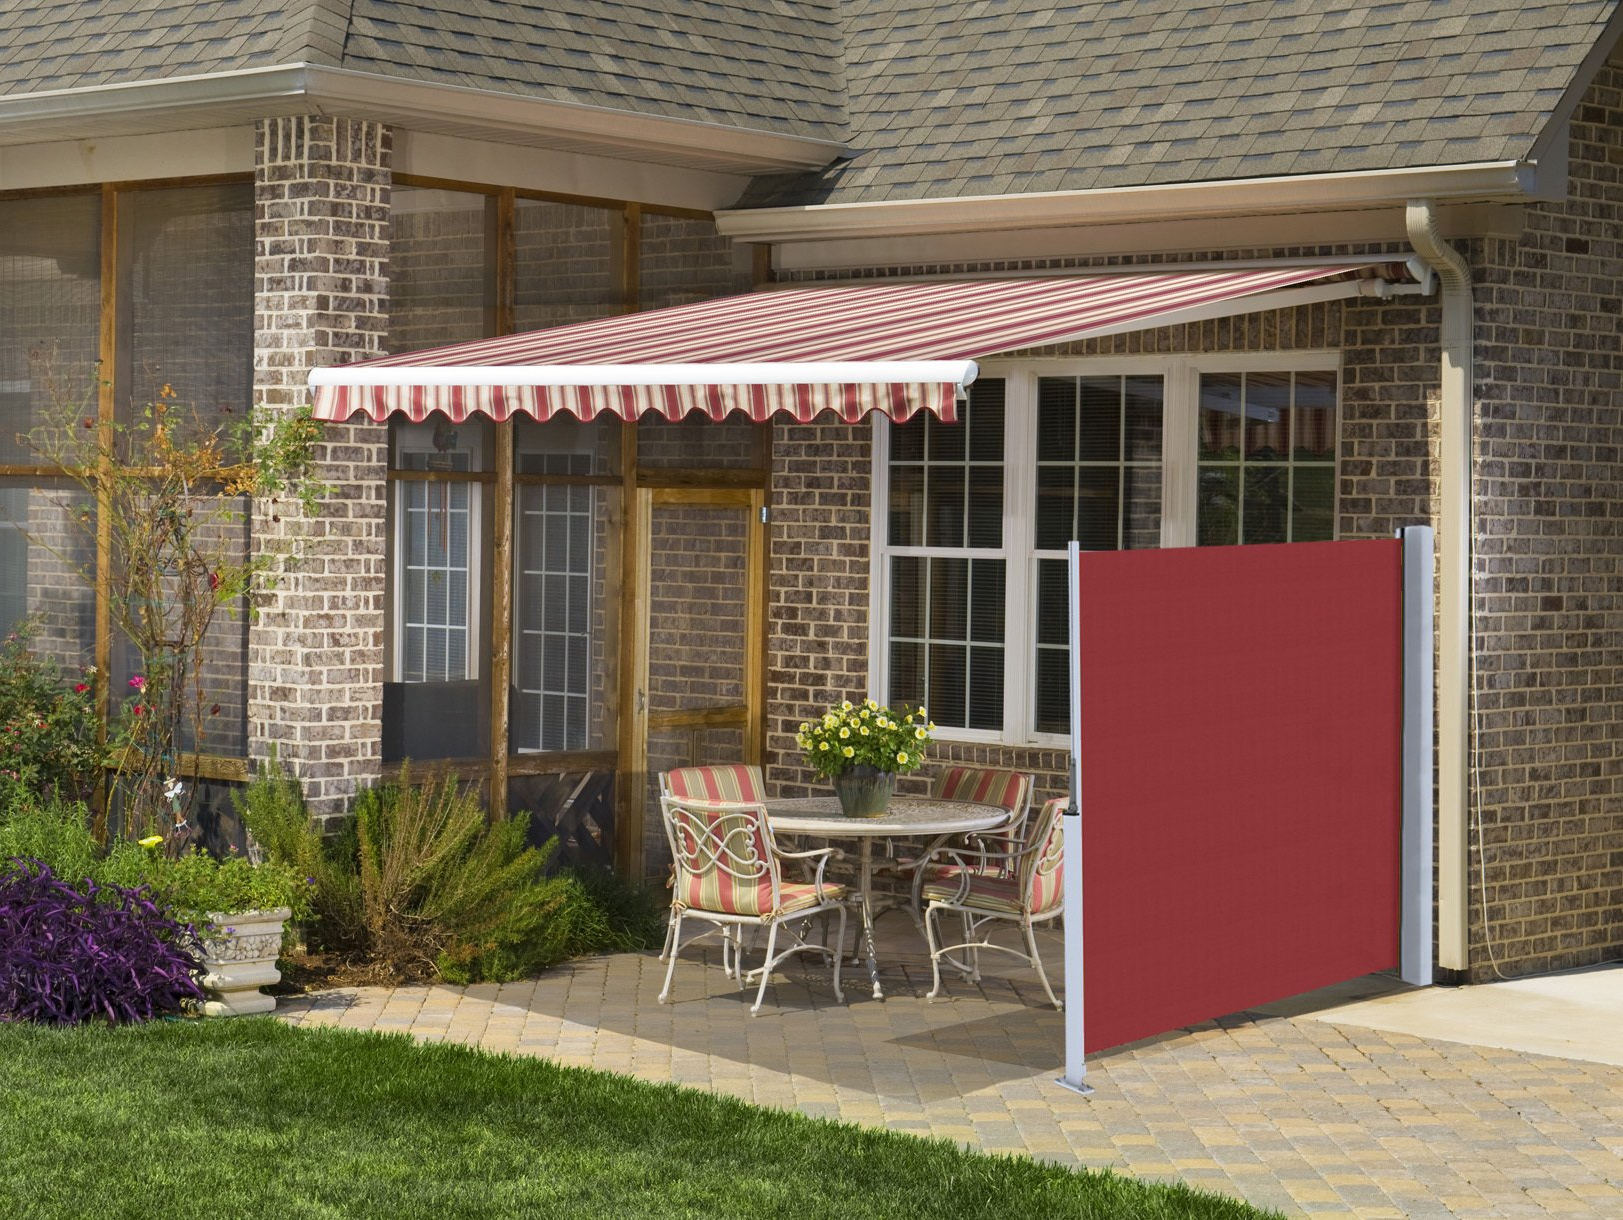 A brick house with a red and white awning over a patio